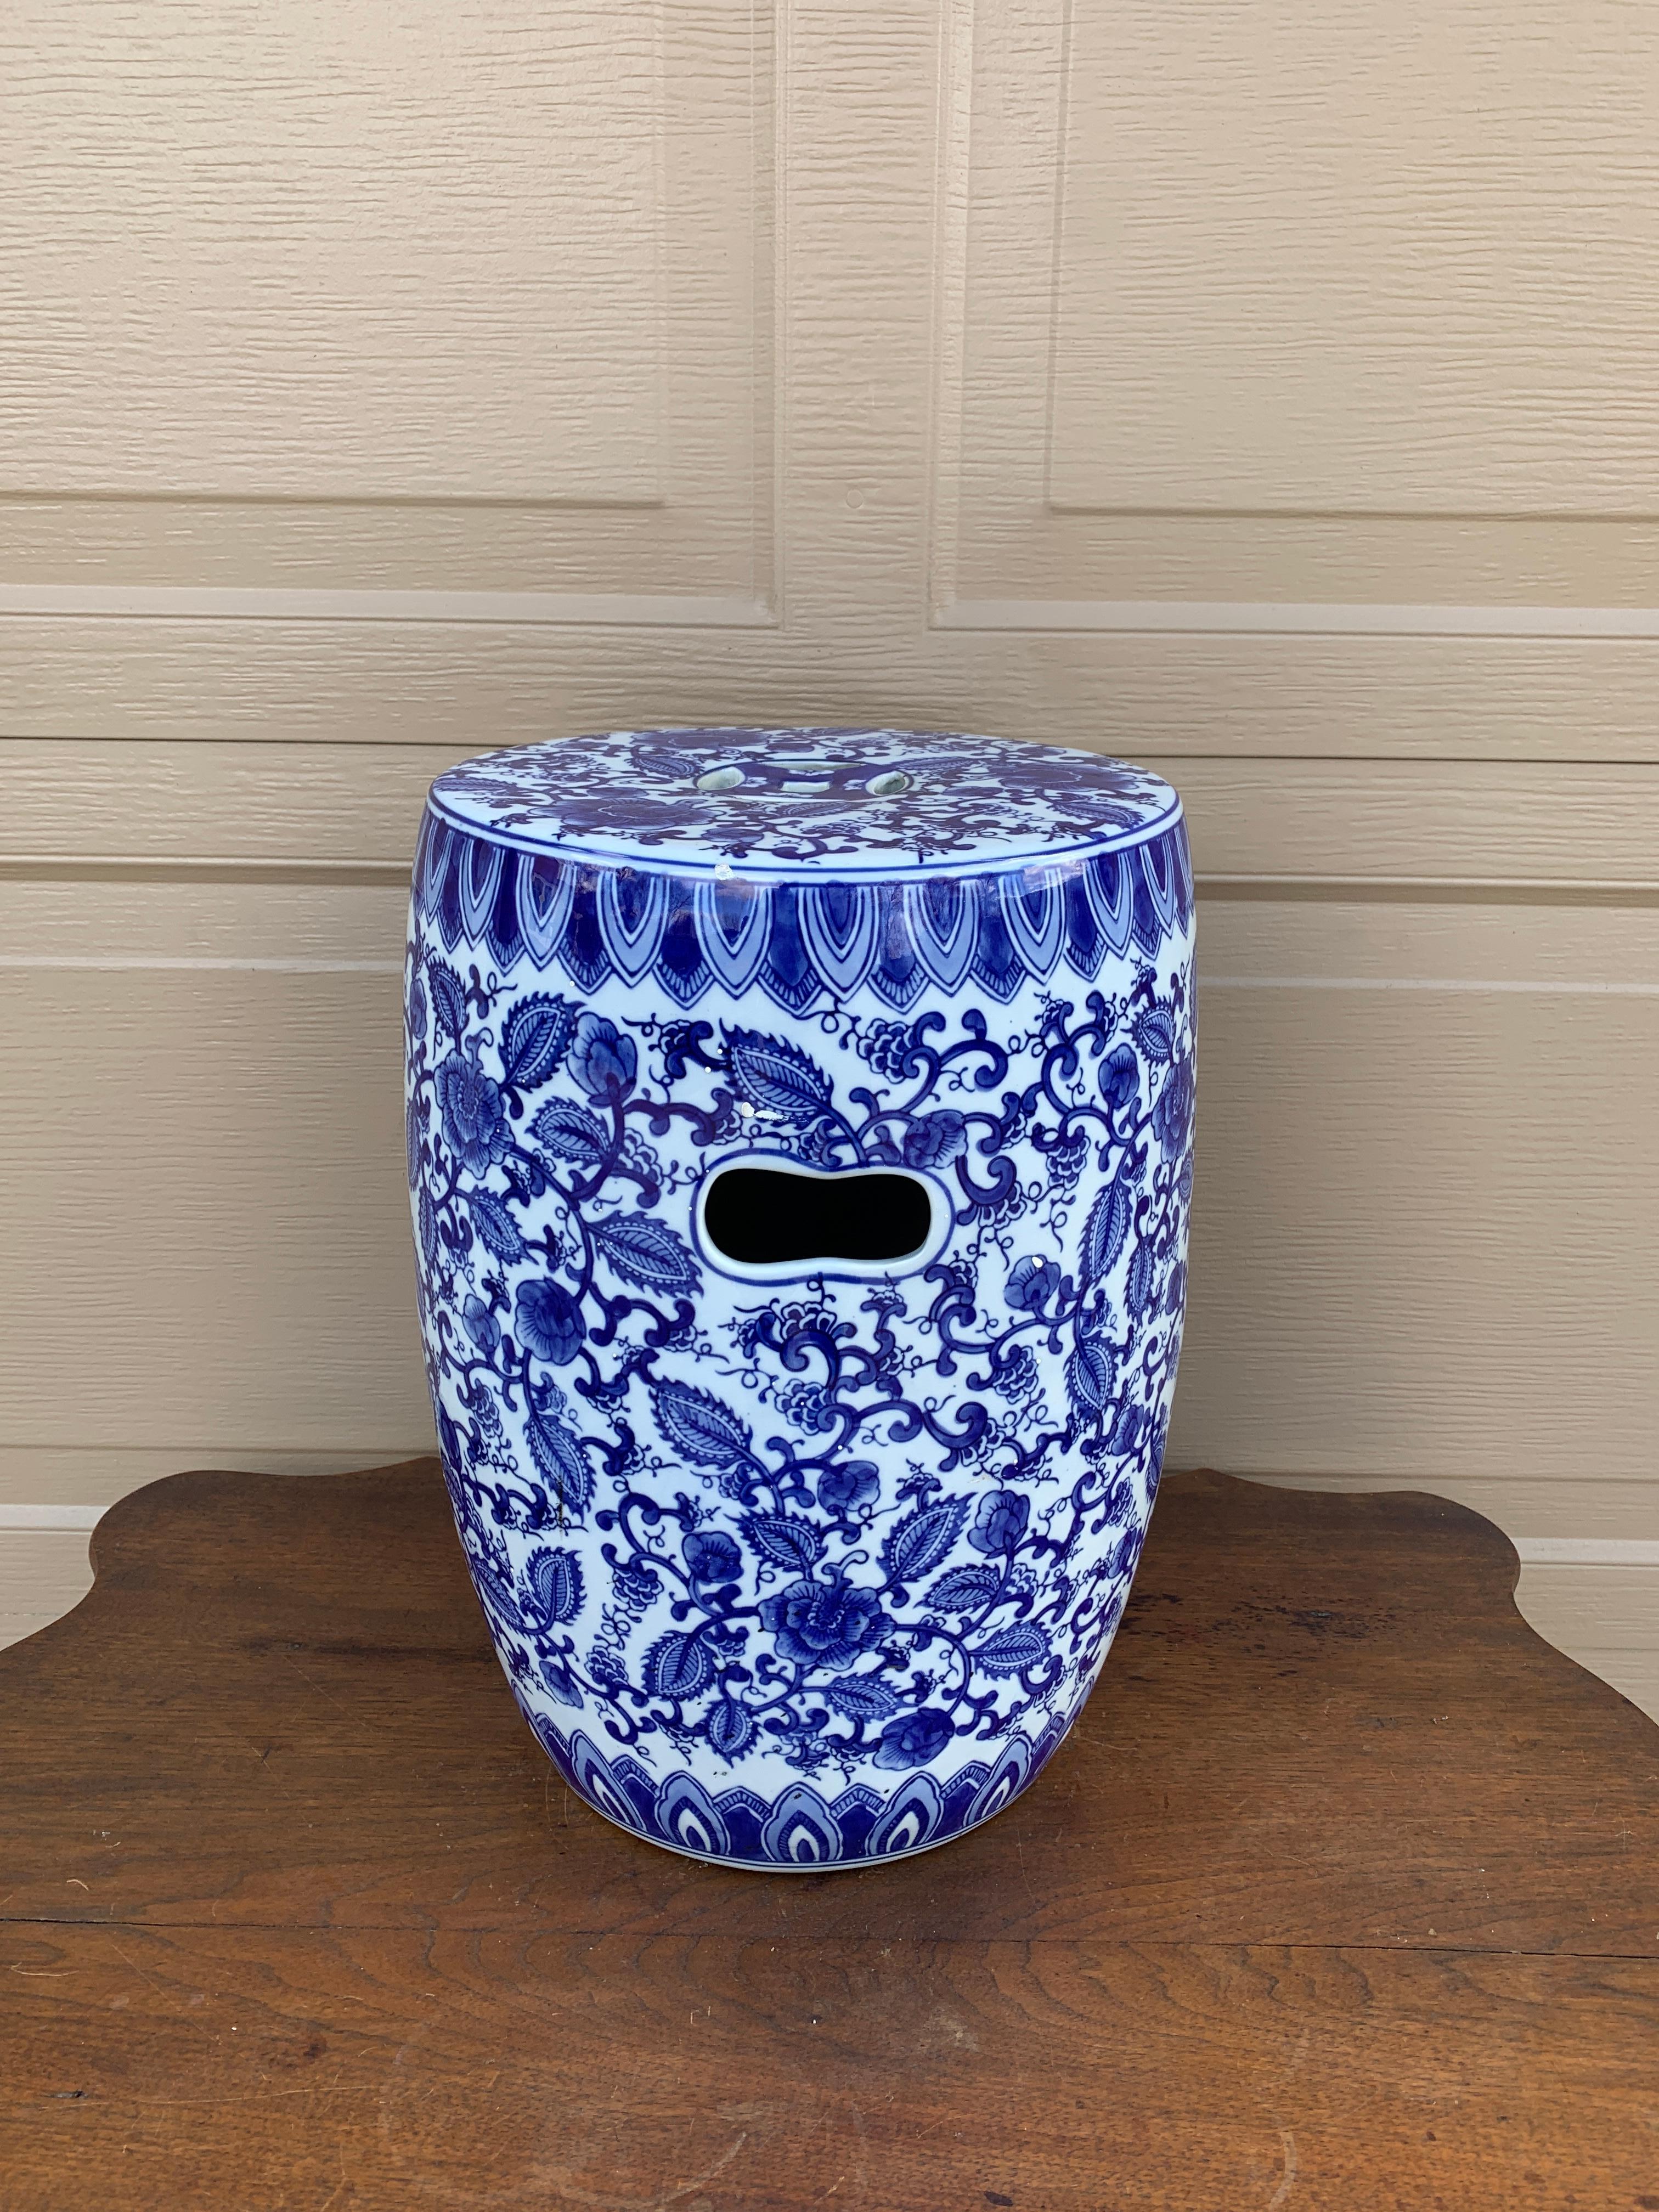 Chinoiserie Blue and White Porcelain Garden Stool For Sale 3